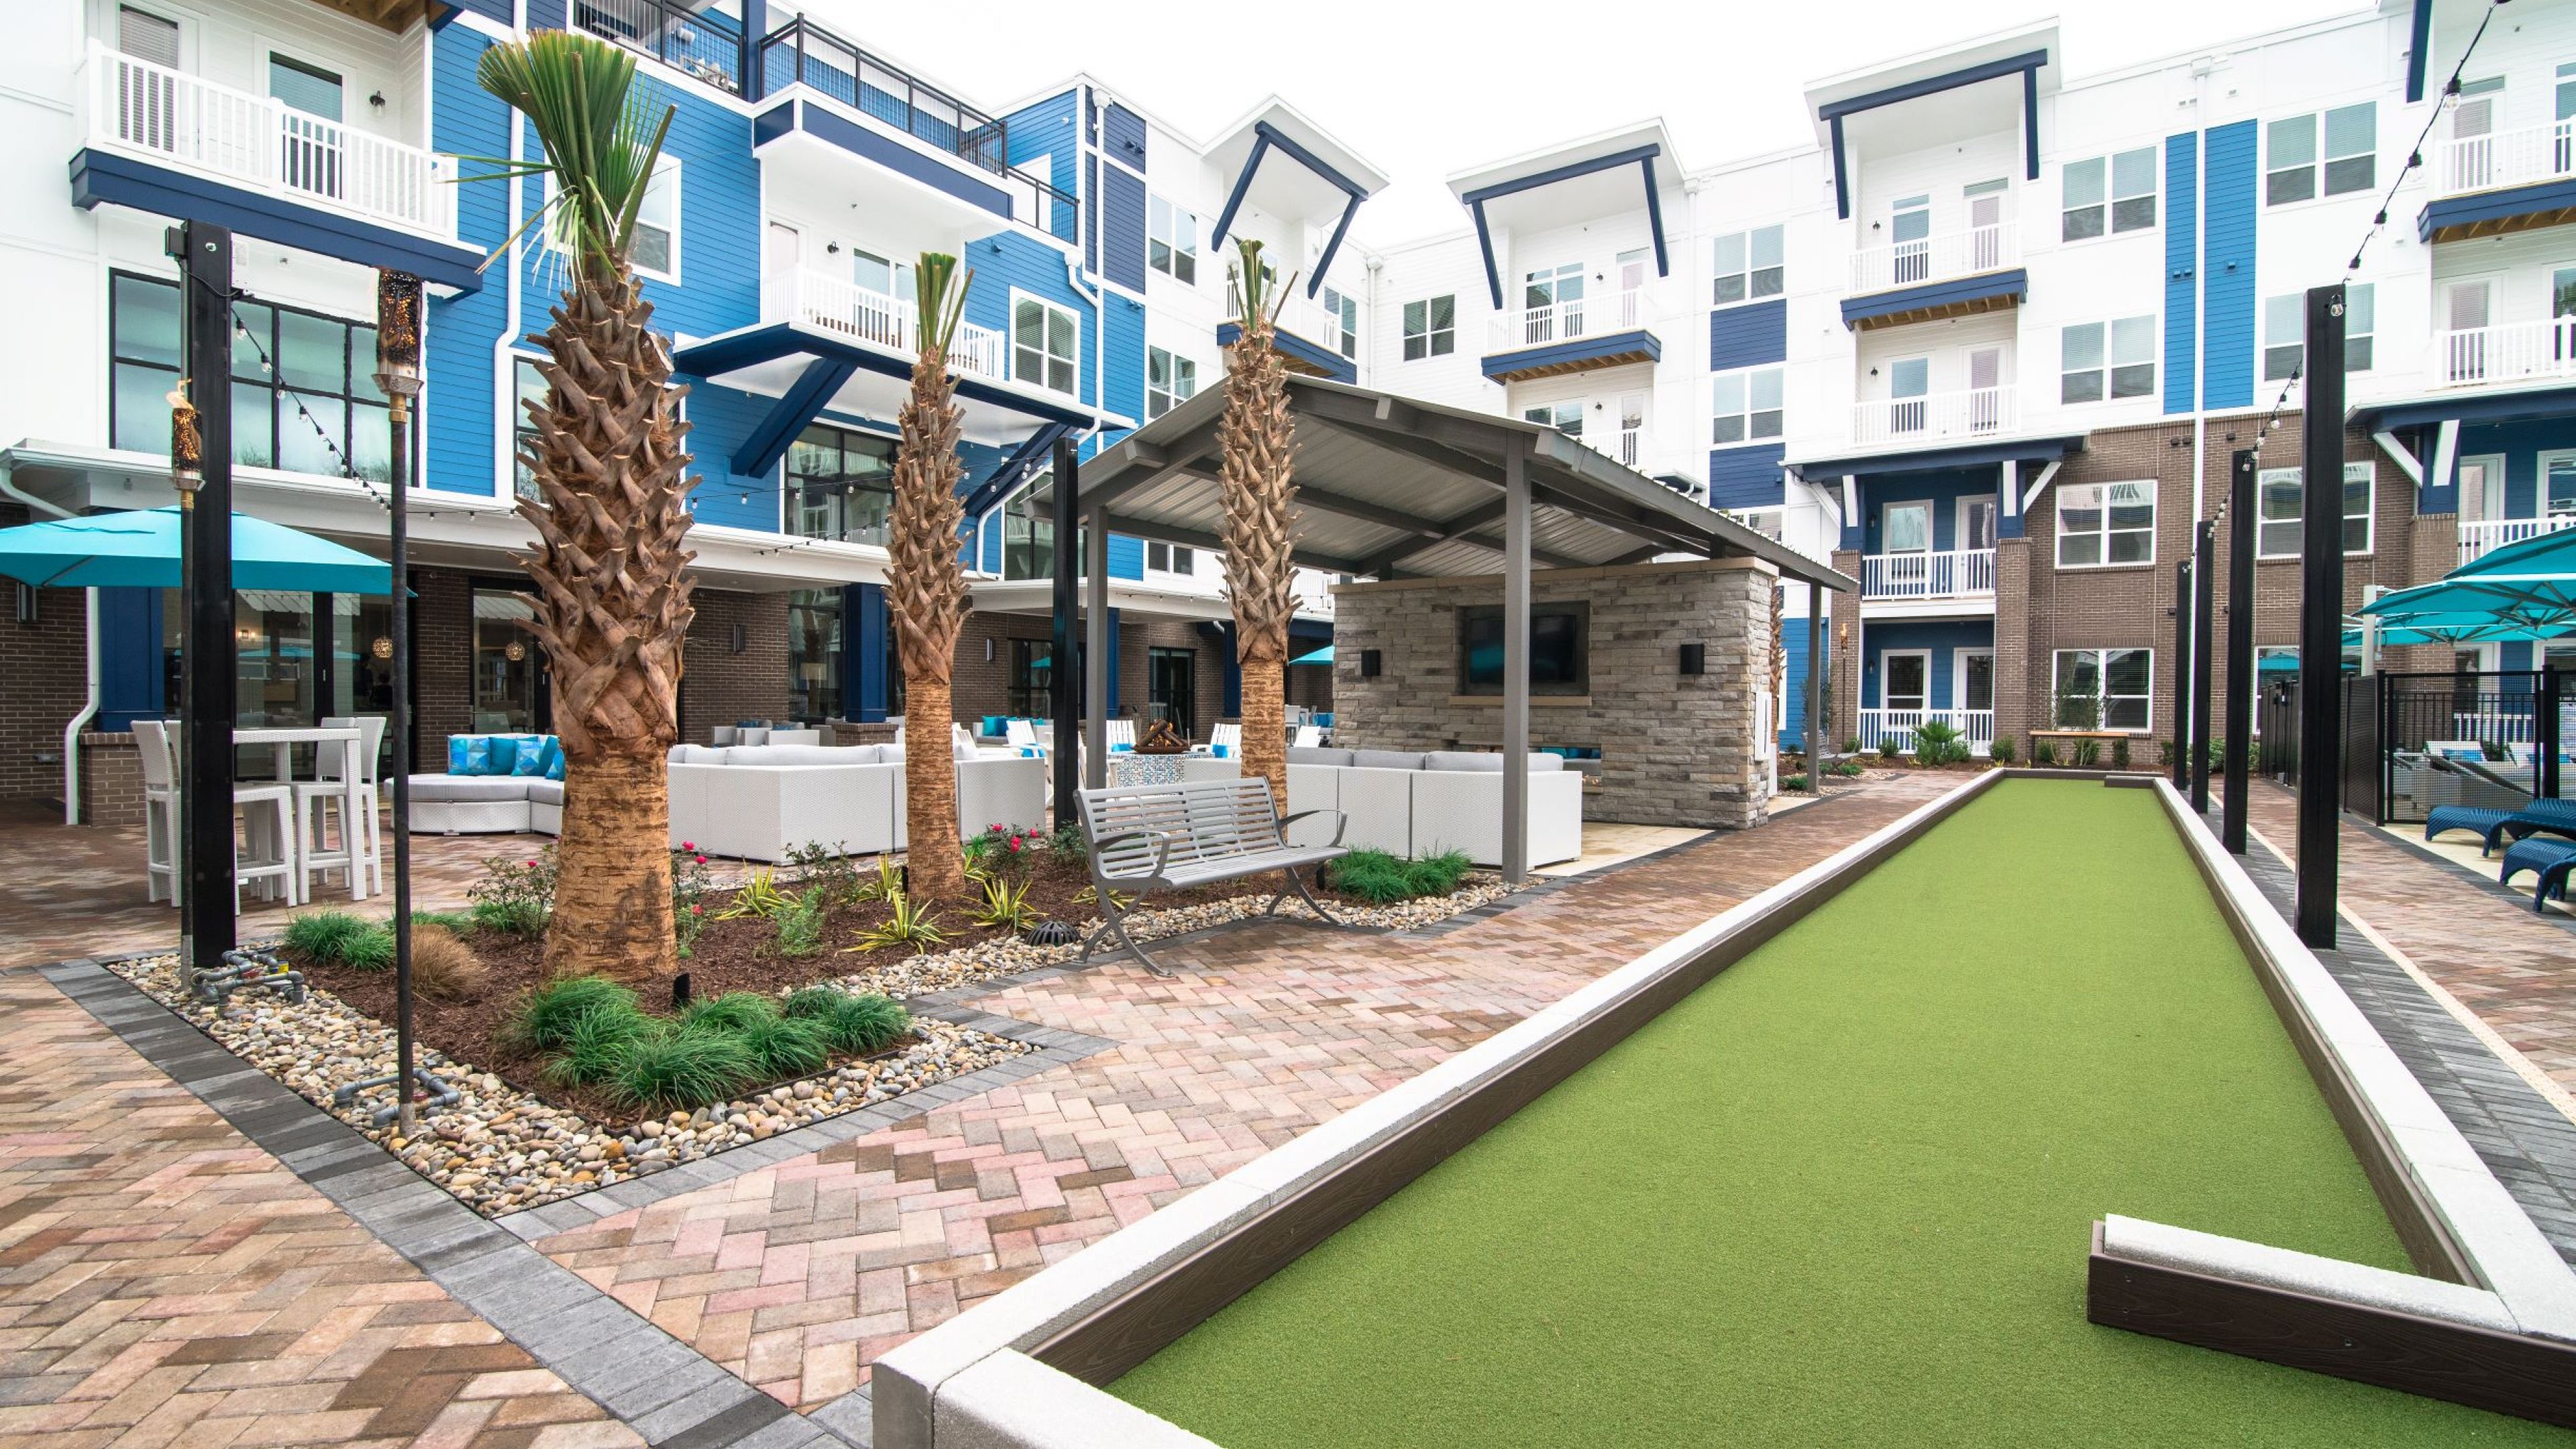 Hawthorne at Indy West beautiful outdoor courtyard with an outdoor lounge area, bocce ball court and lawn, and cabanas